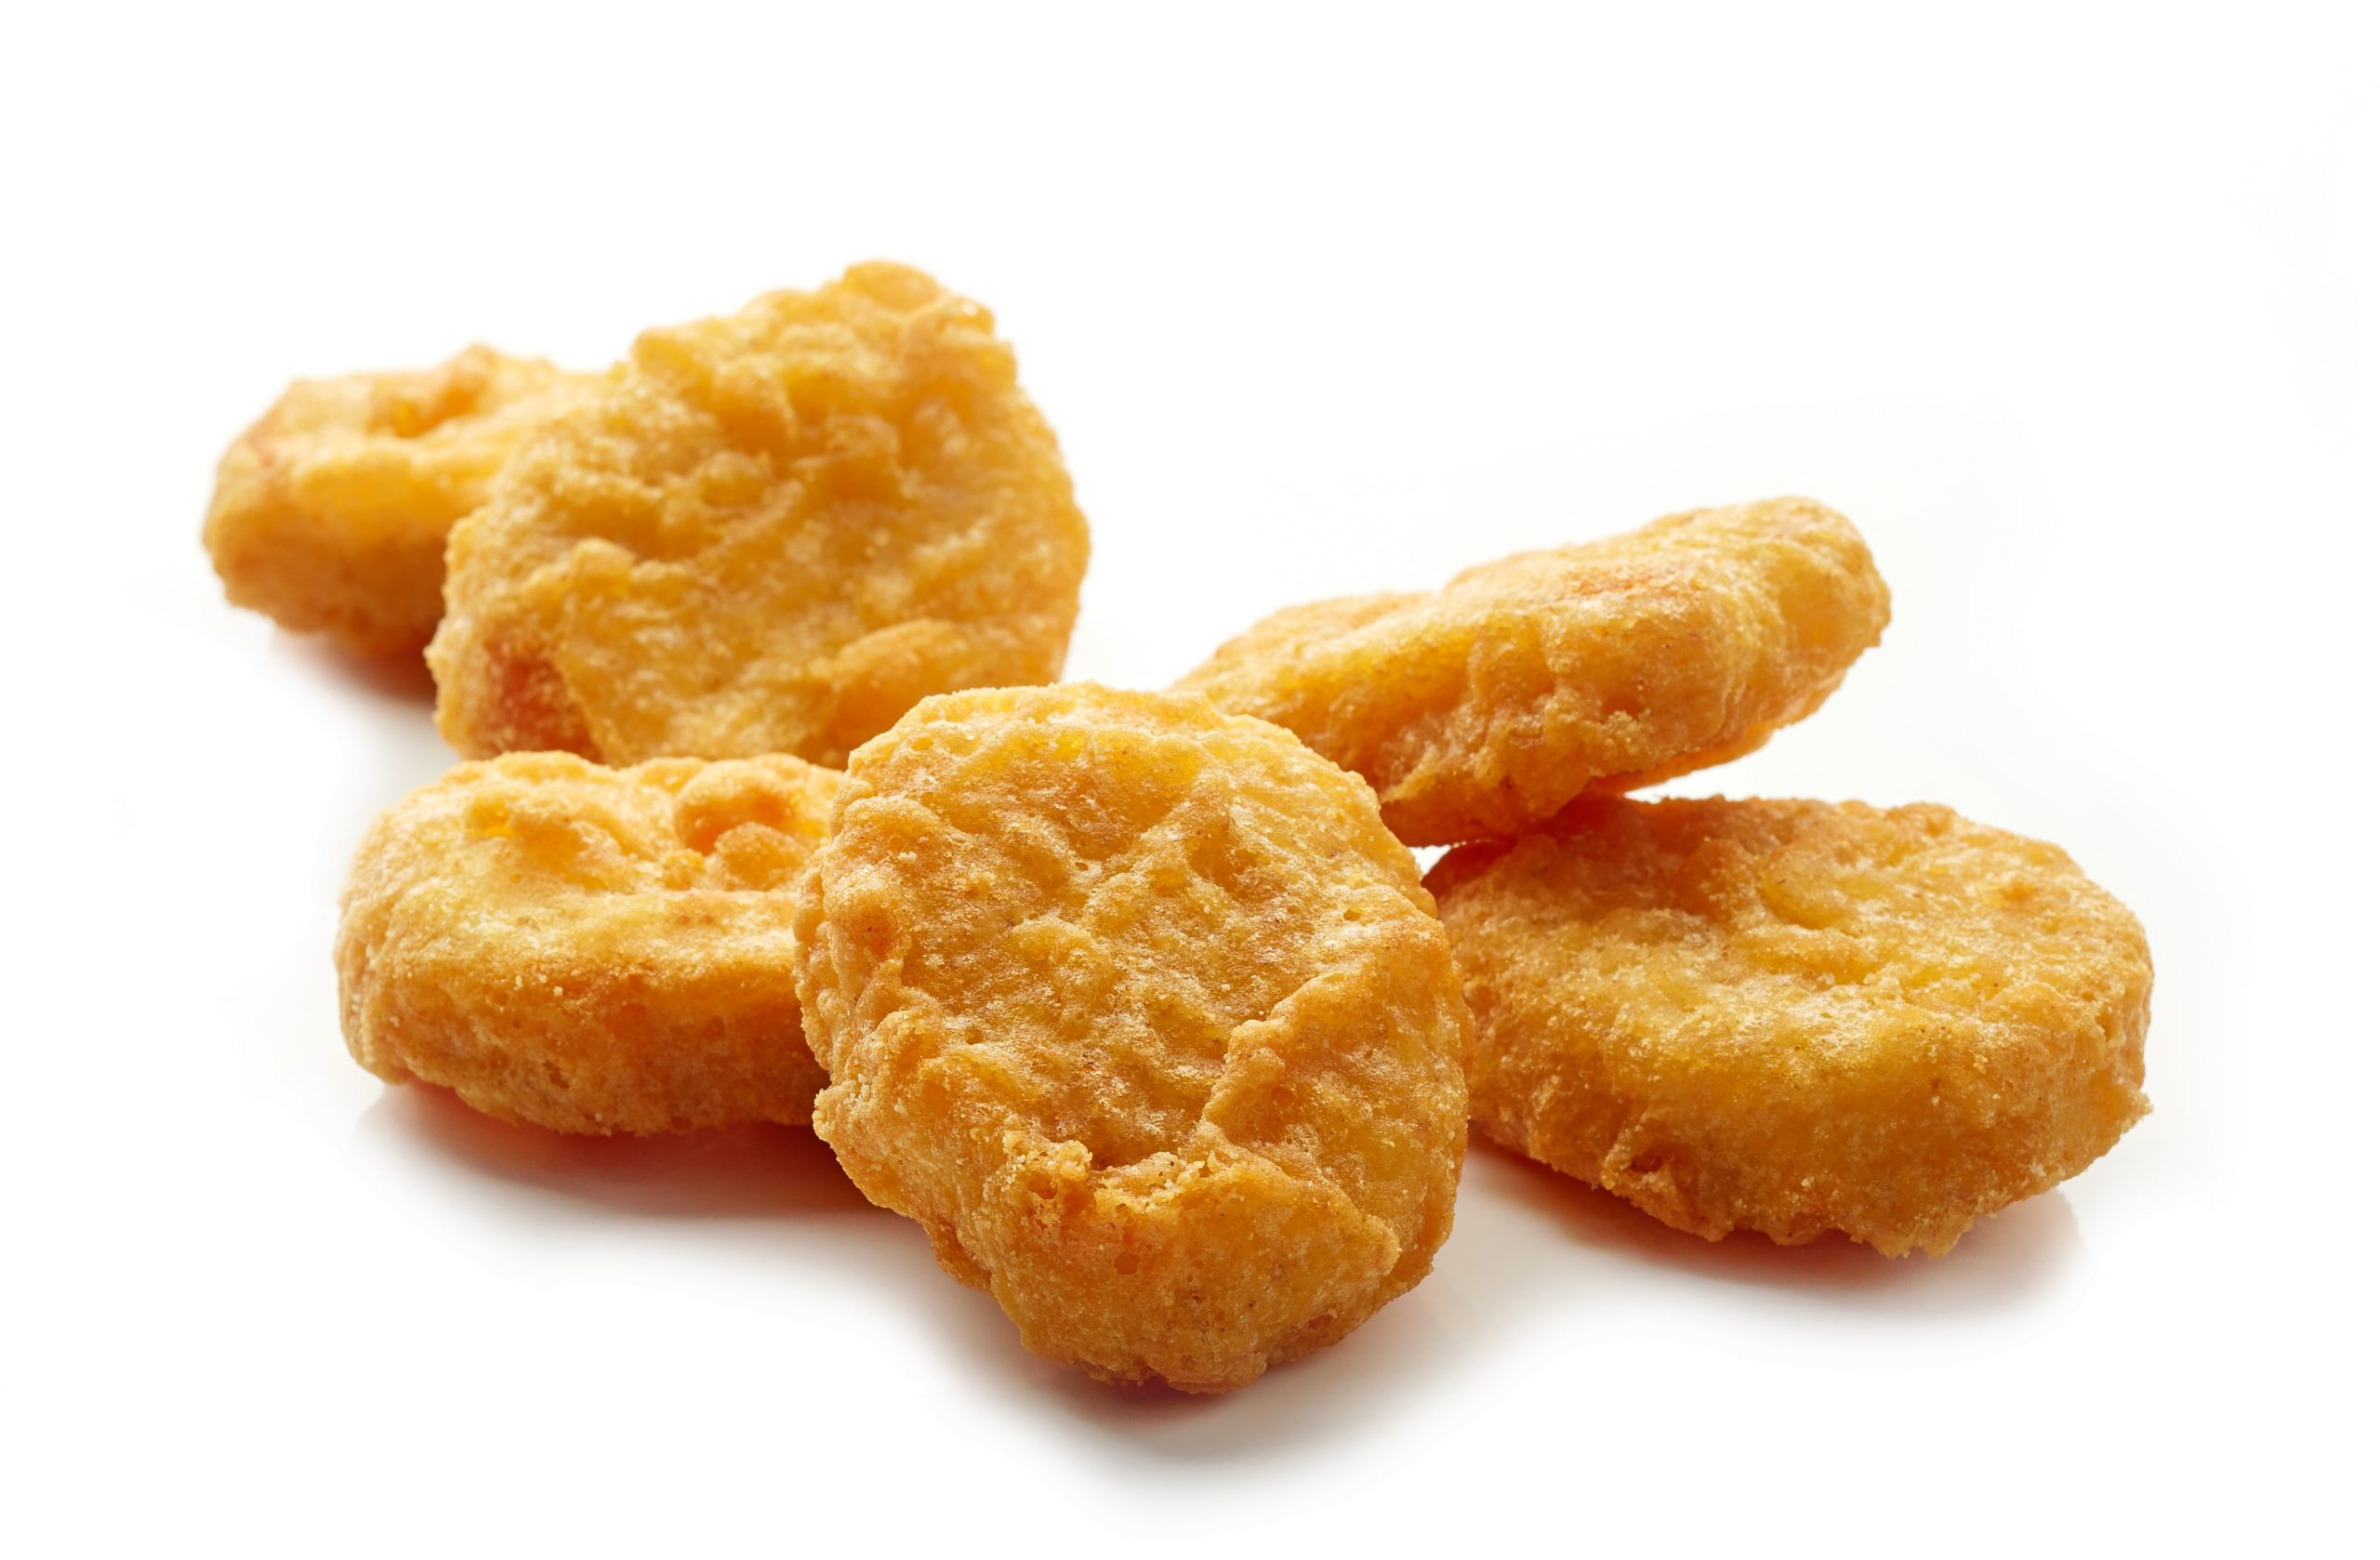 Chicken nugget fan launches appeal to buy snack